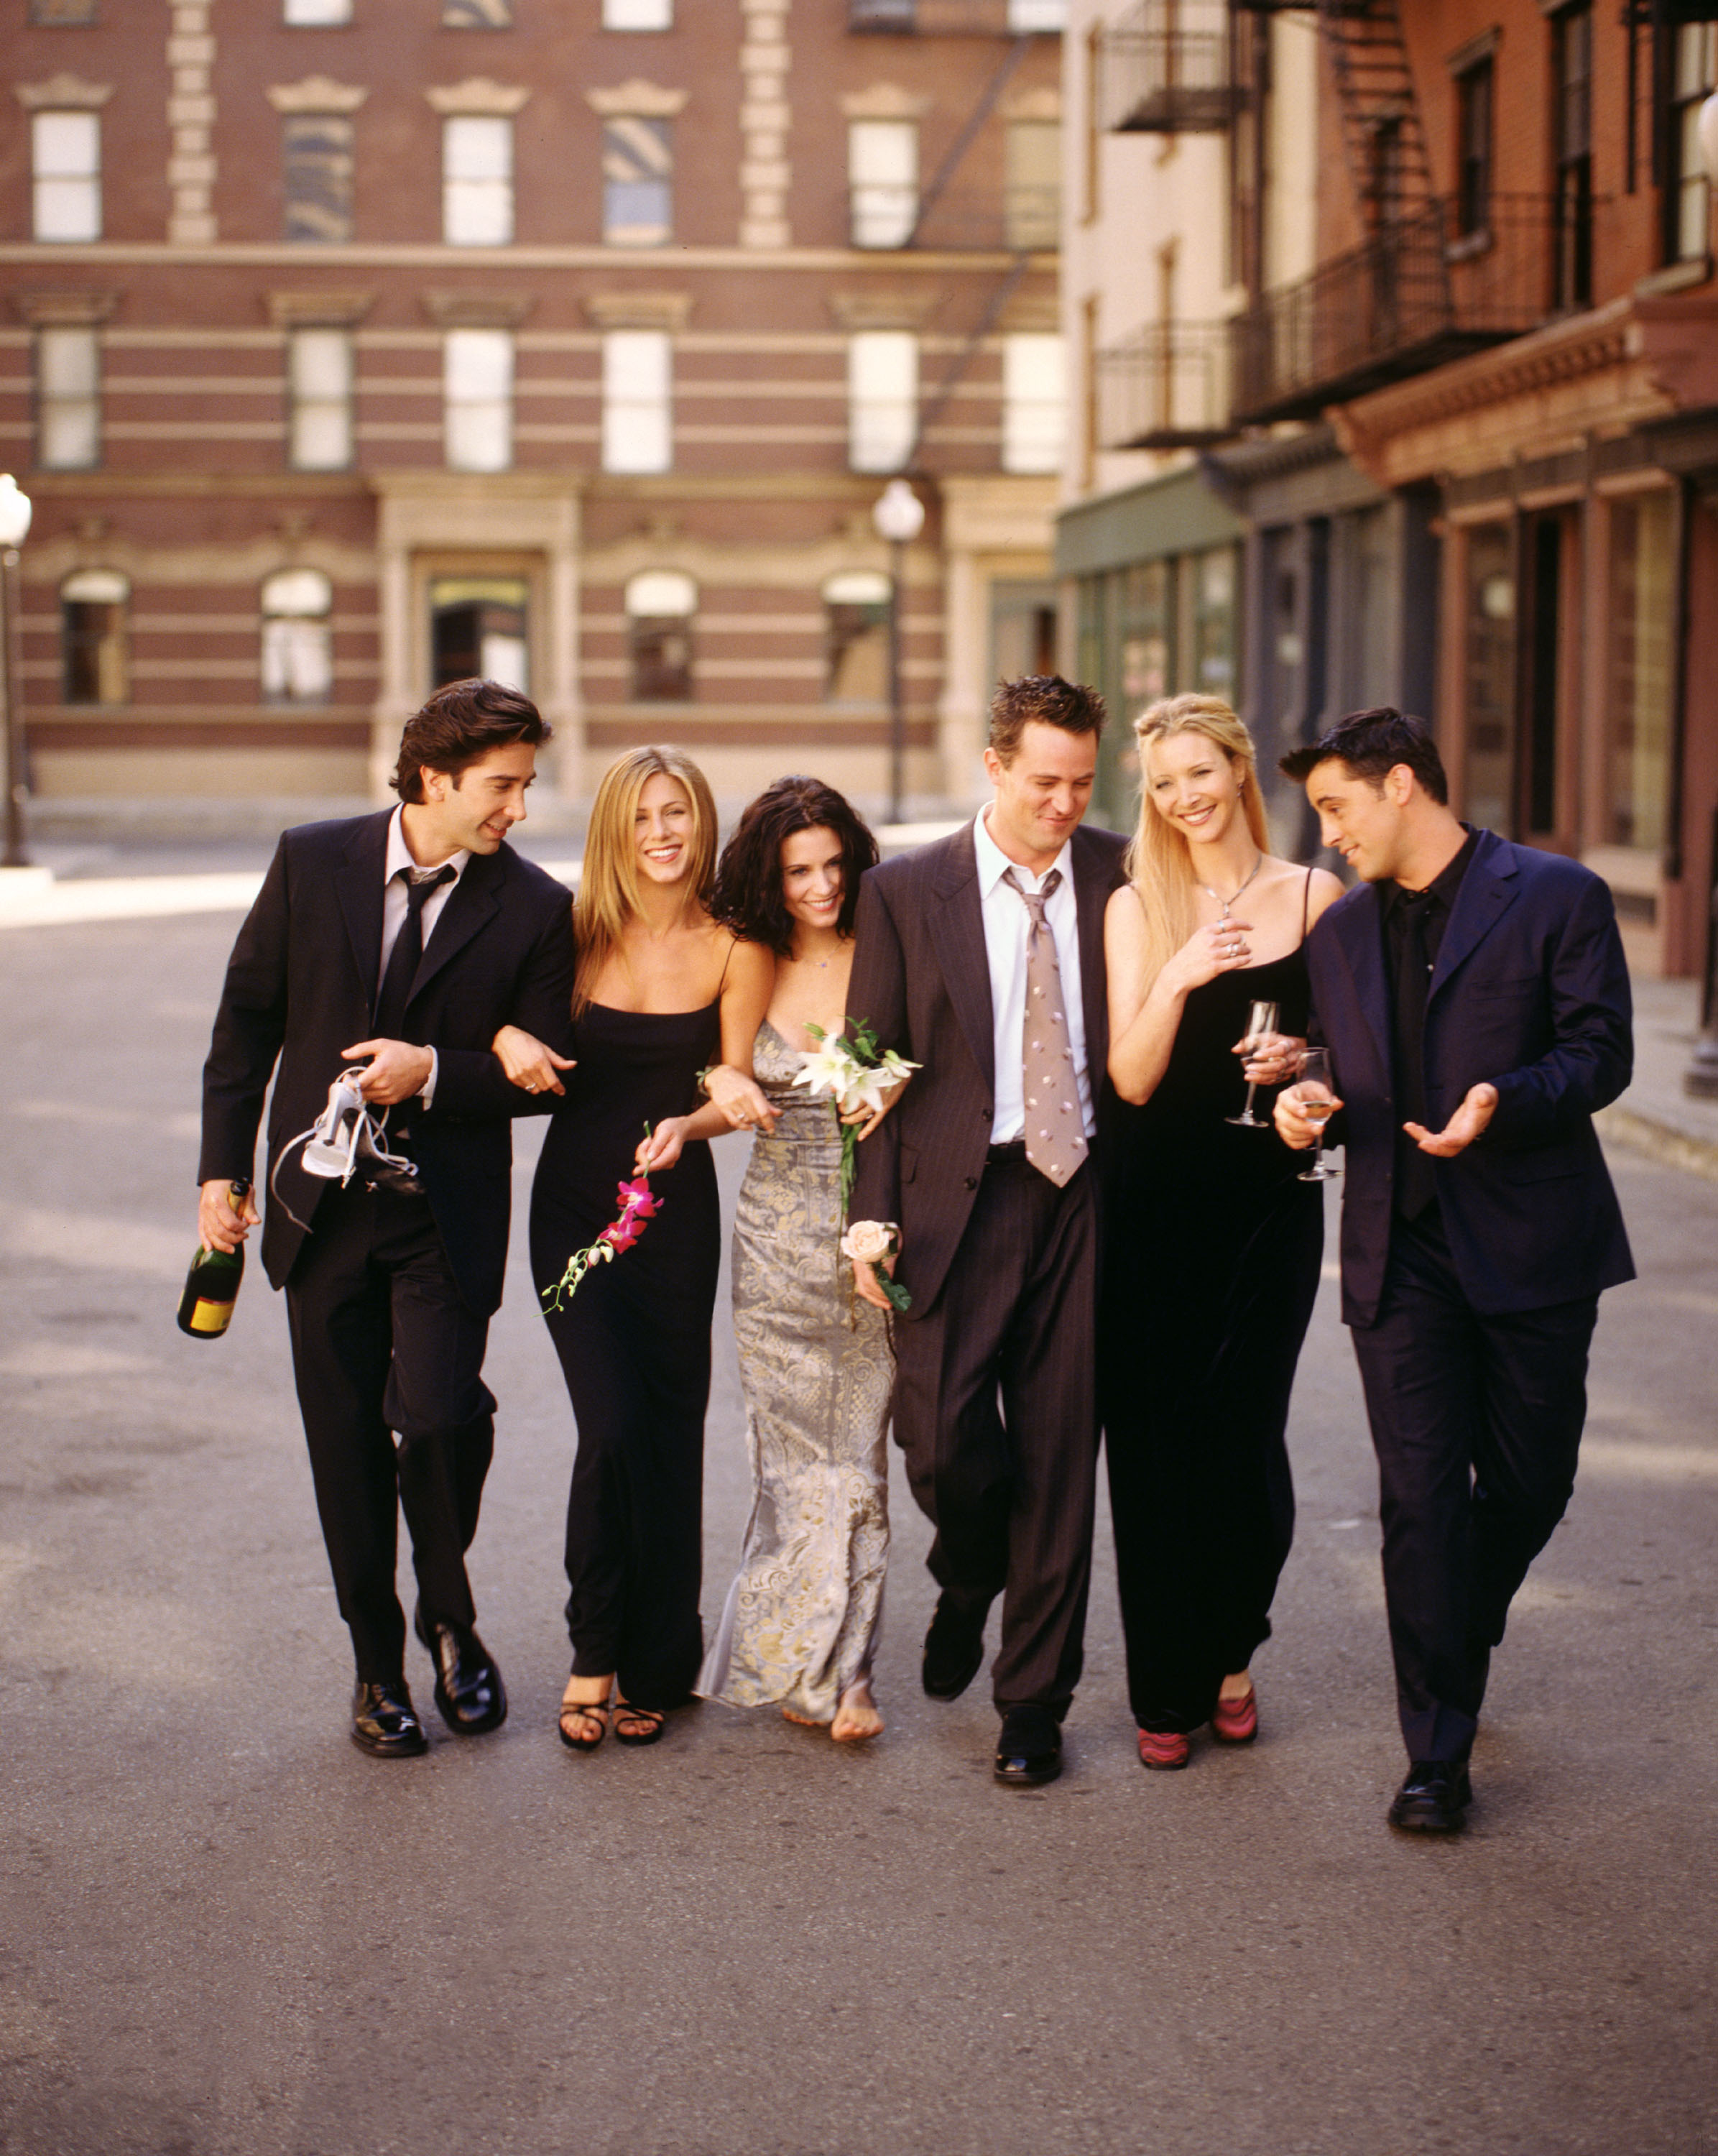 The cast of &quot;Friends&quot; walking down the street in a promo shot